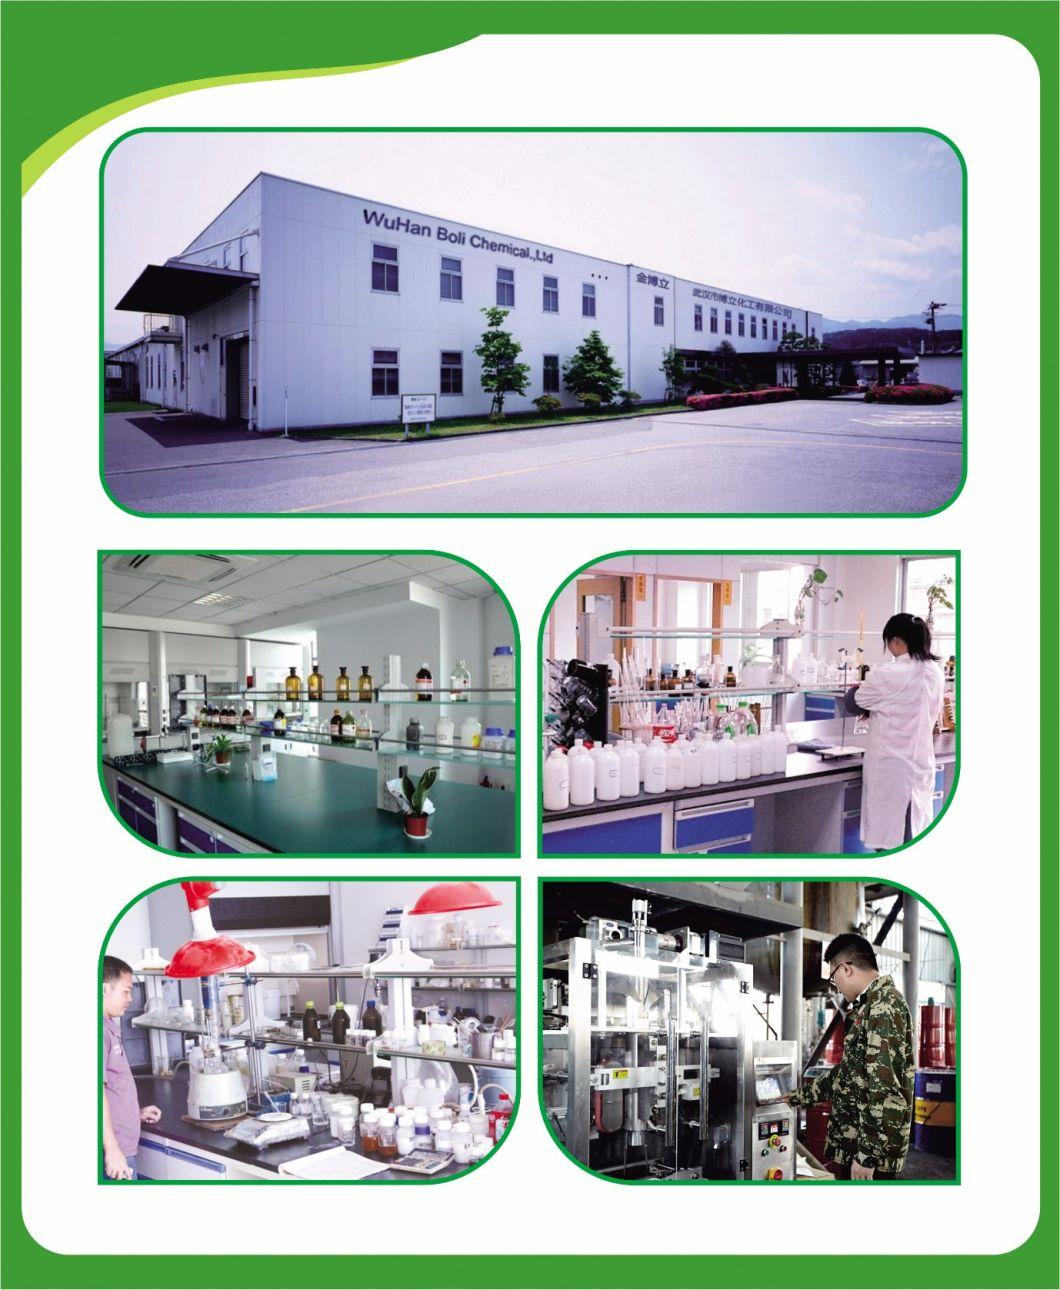 AG Luaage Furniture Industry Favorite Good Low Cost No Harm to Human Body Chloroprene Contact Adhesive Glue